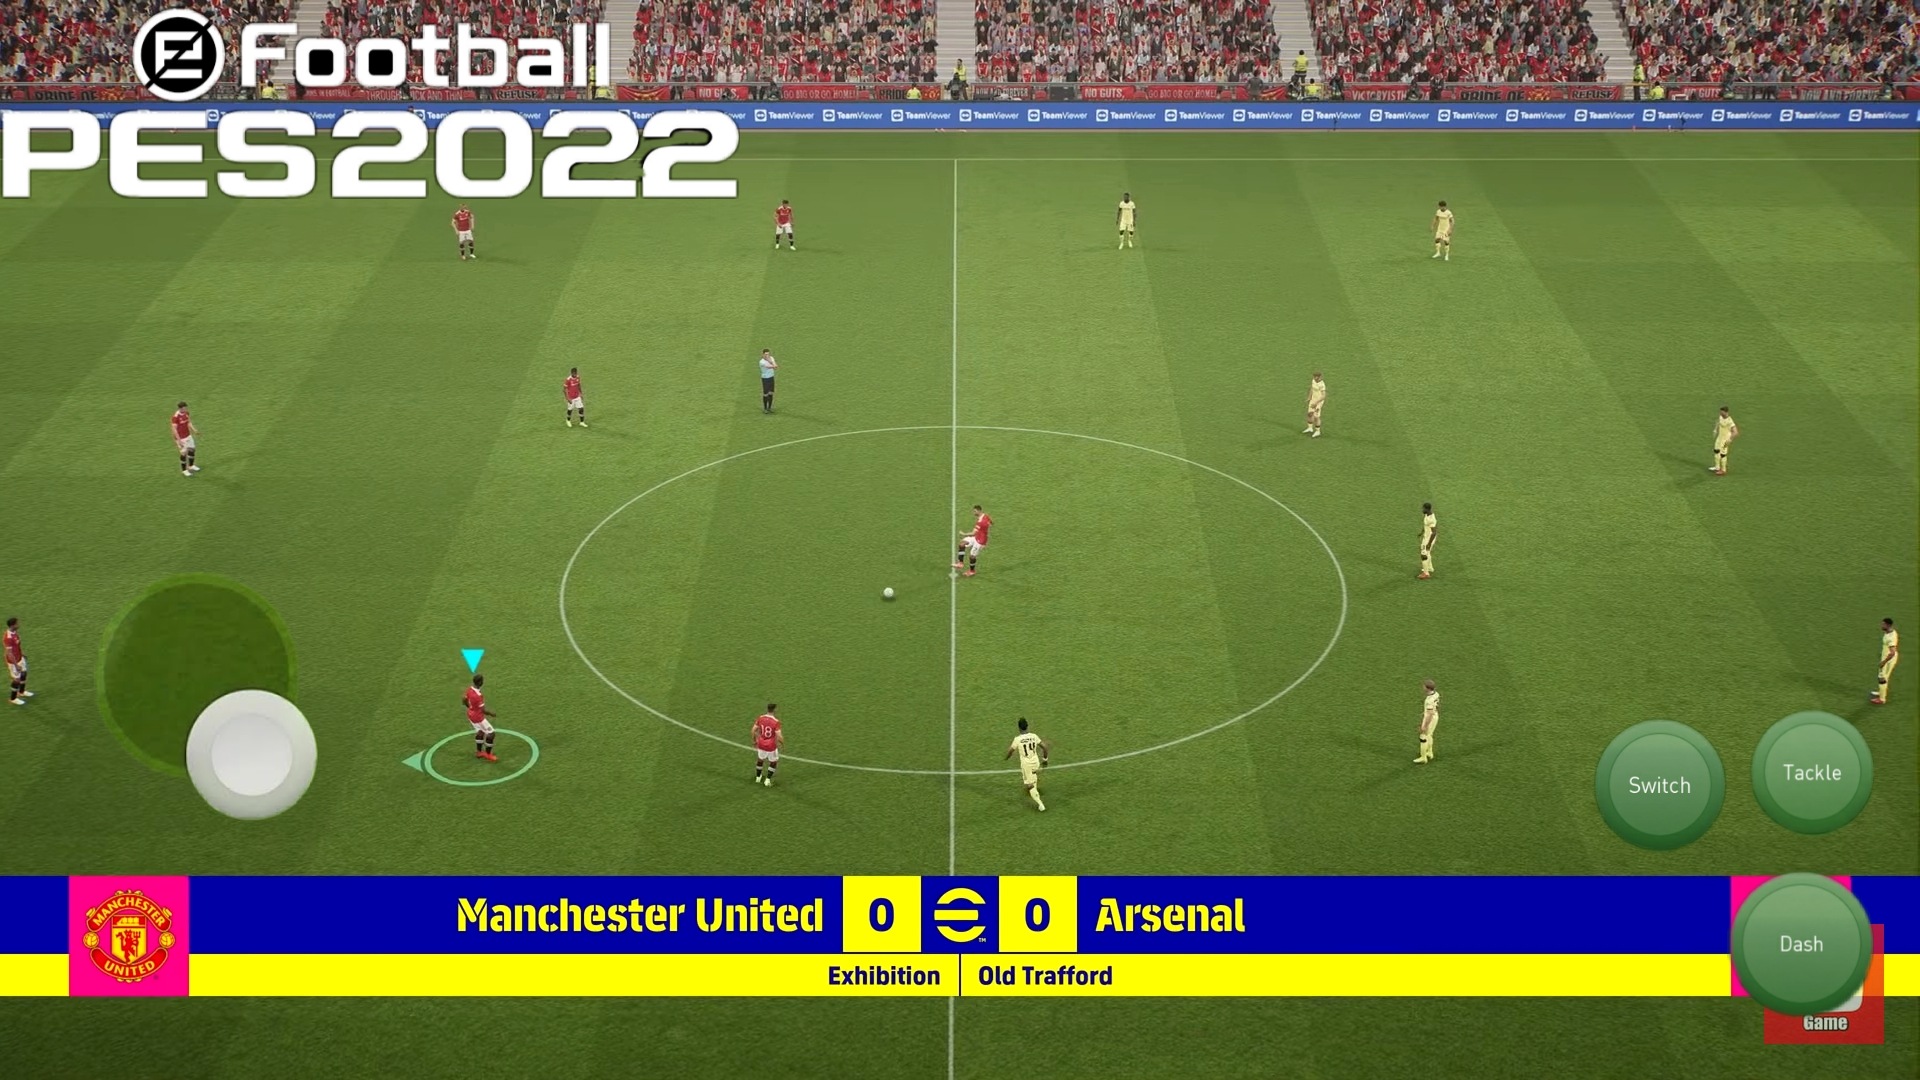 How to download efootball pes 2022